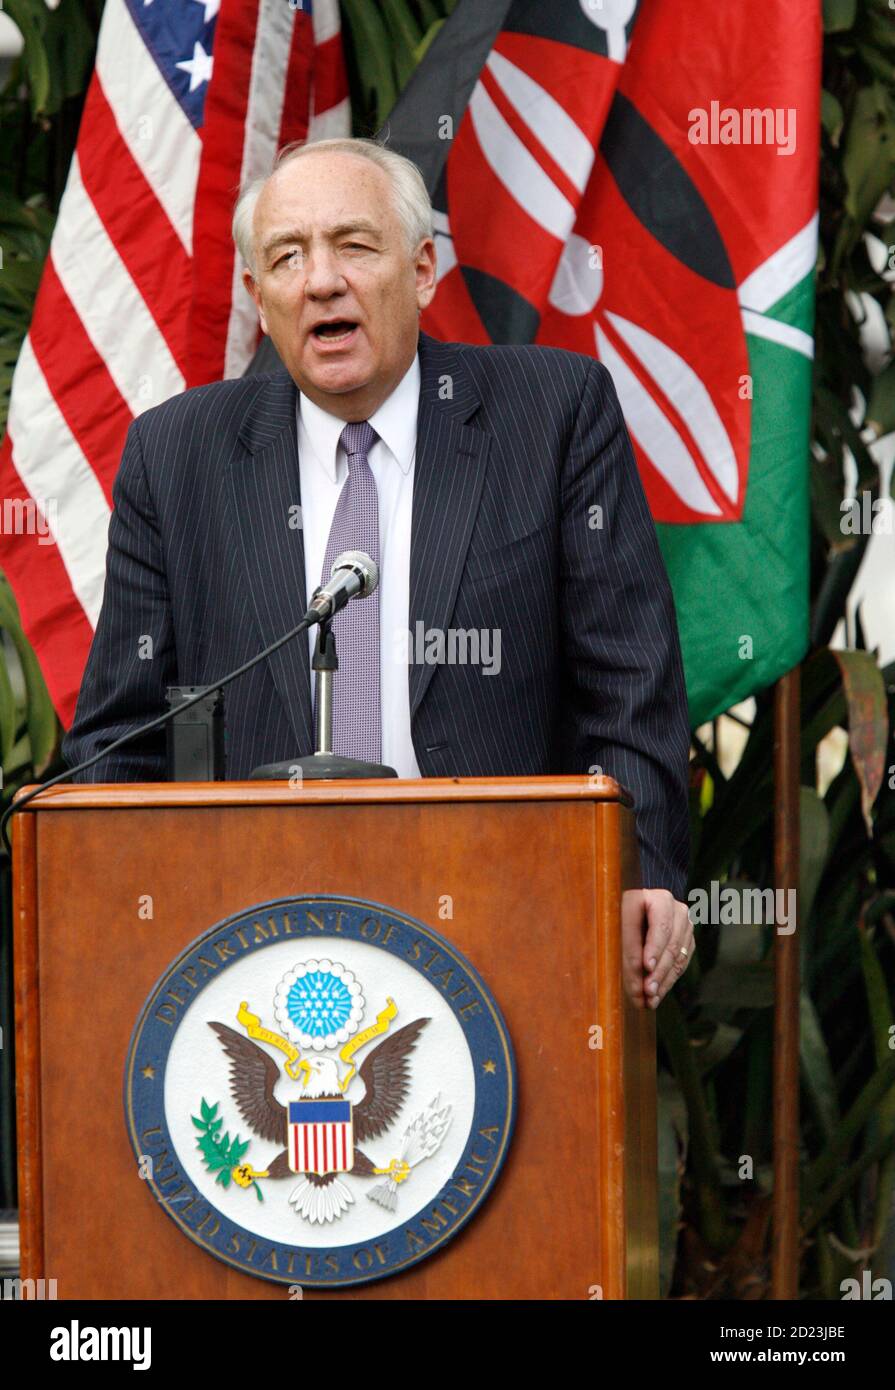 Stephen Rapp, U.S. ambassador-at-large for war crimes issues, addresses a news conference in Kenya's capital Nairobi, November 16, 2009. The United States will attend an International Criminal Court (ICC) meeting this week as an observer for the first time since the Hague court was set up in 2002, President Barack Obama's war crimes envoy said on Monday. REUTERS/Thomas Mukoya (KENYA POLITICS CRIME LAW CONFLICT) Stock Photo